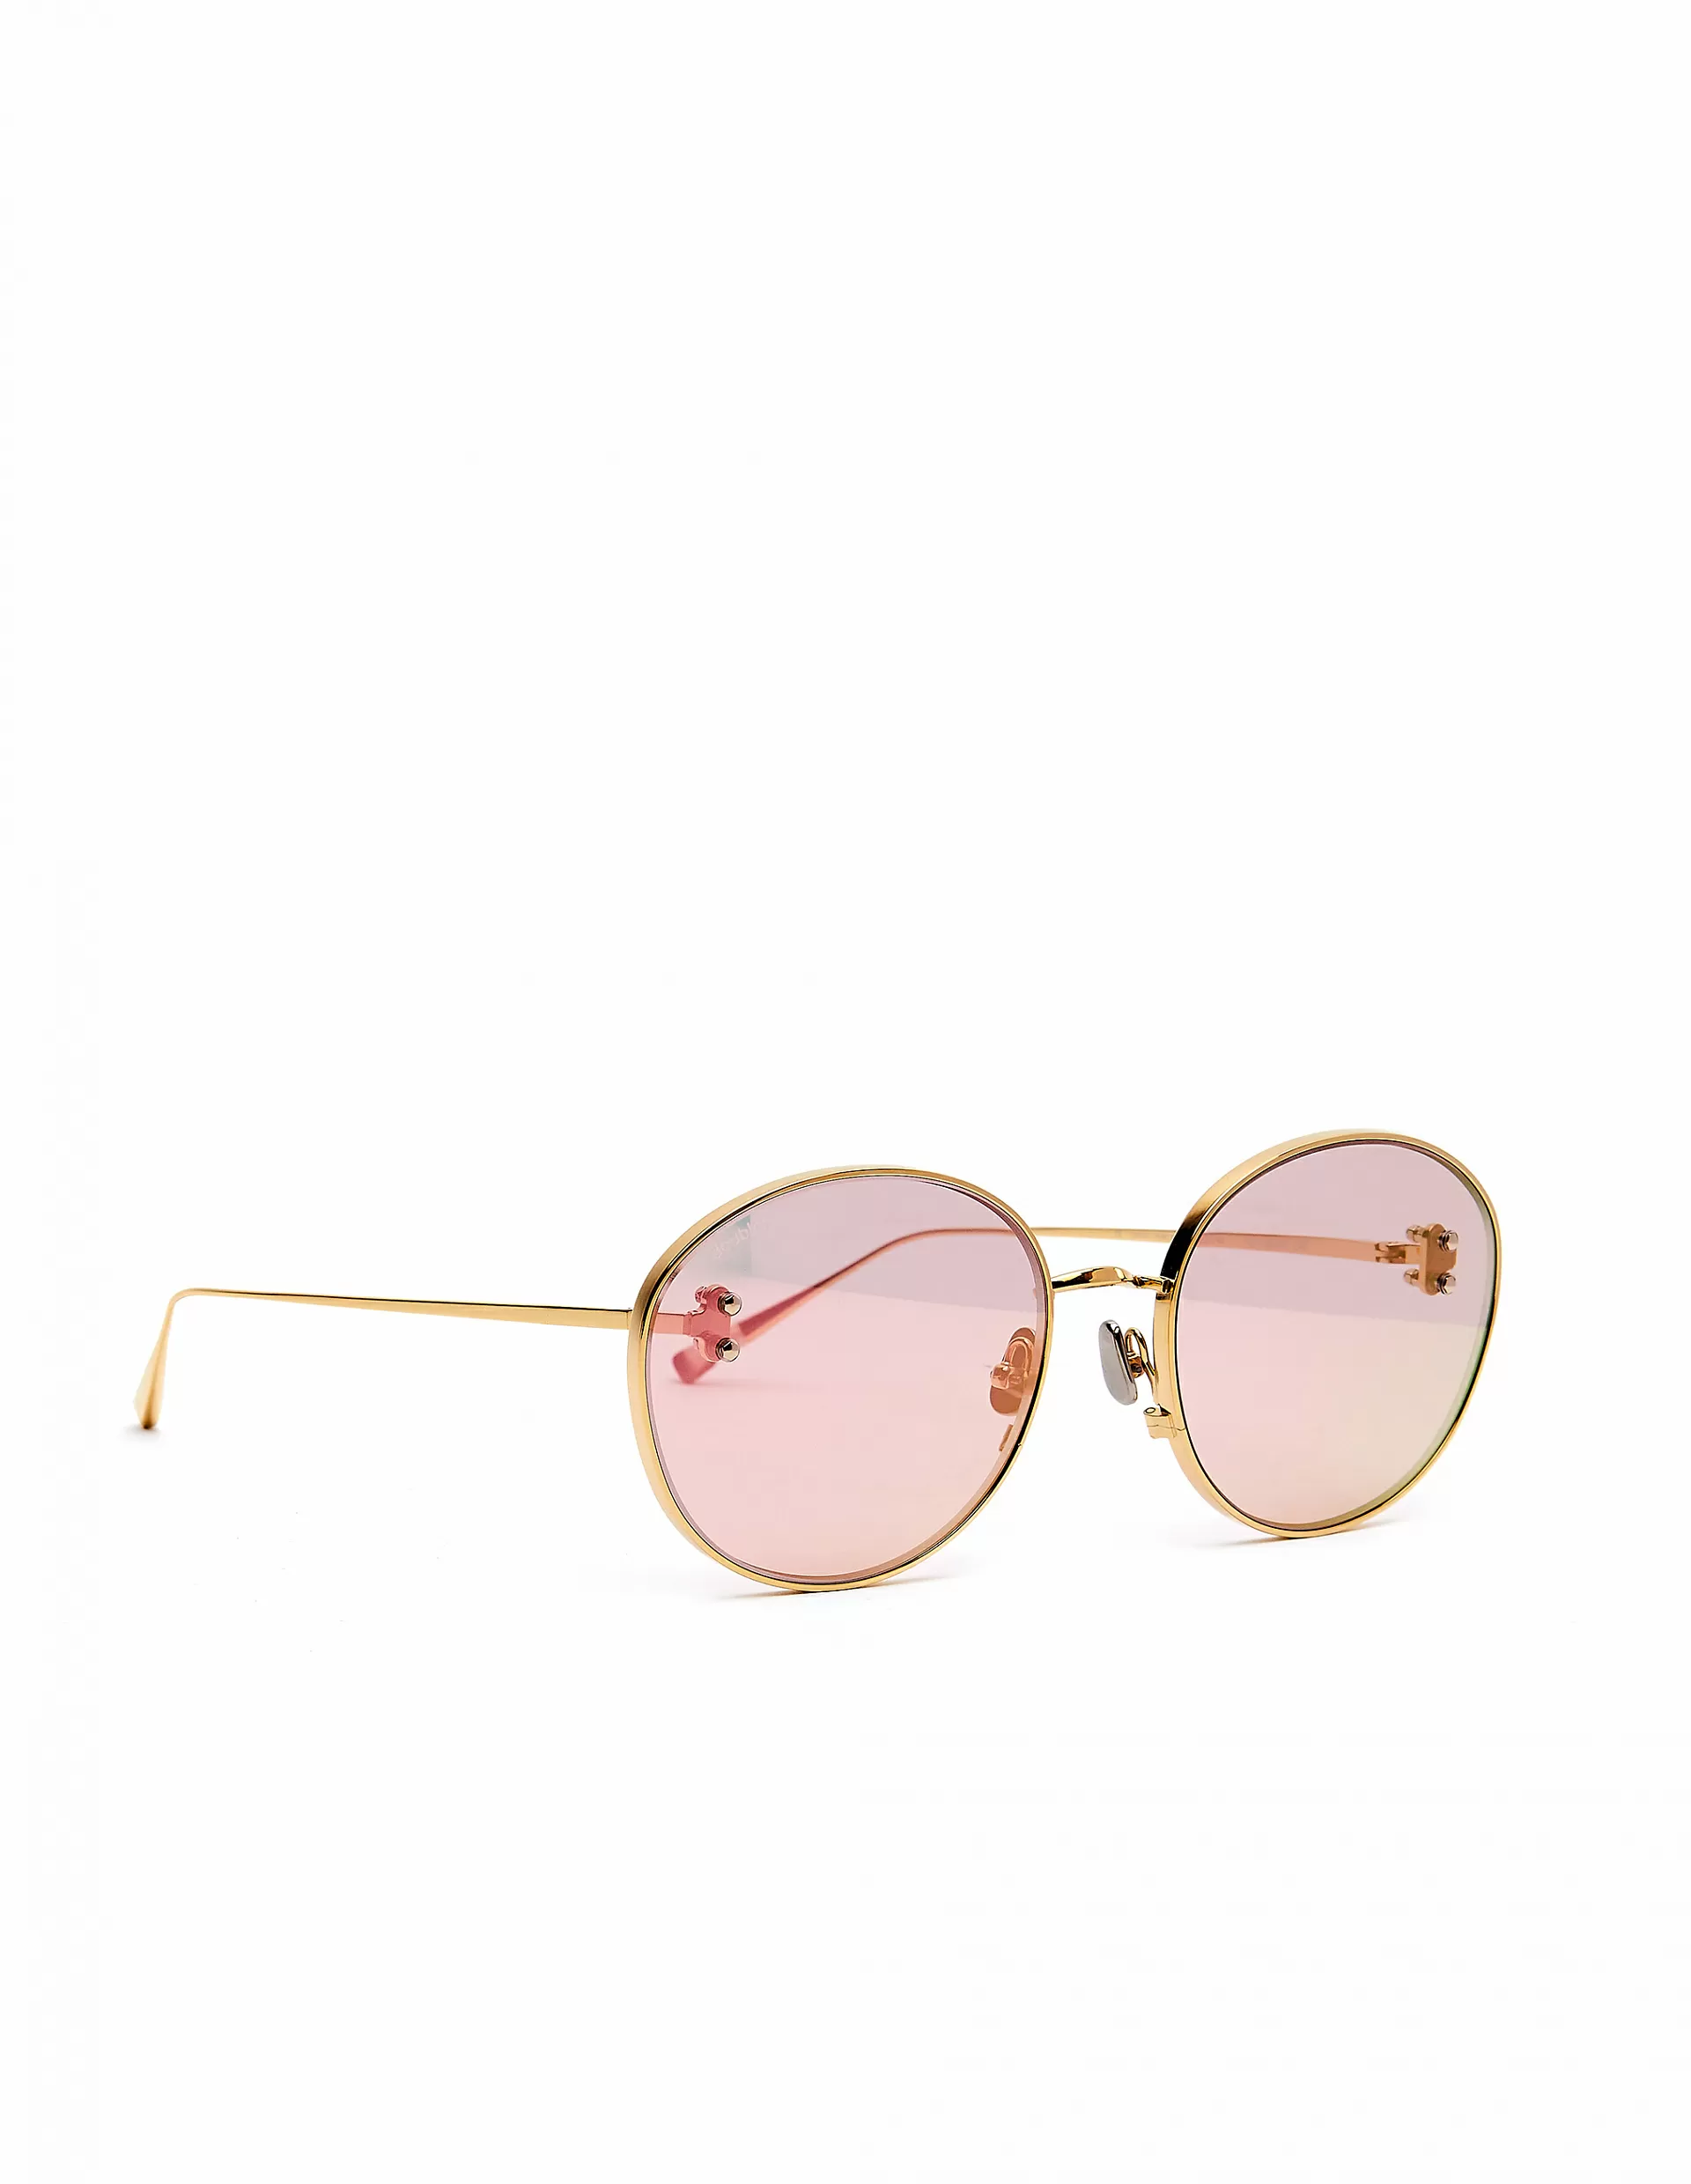 DOUBLET PINK ROUND SUNGLASSES,DB003-P.GOLD-PINK